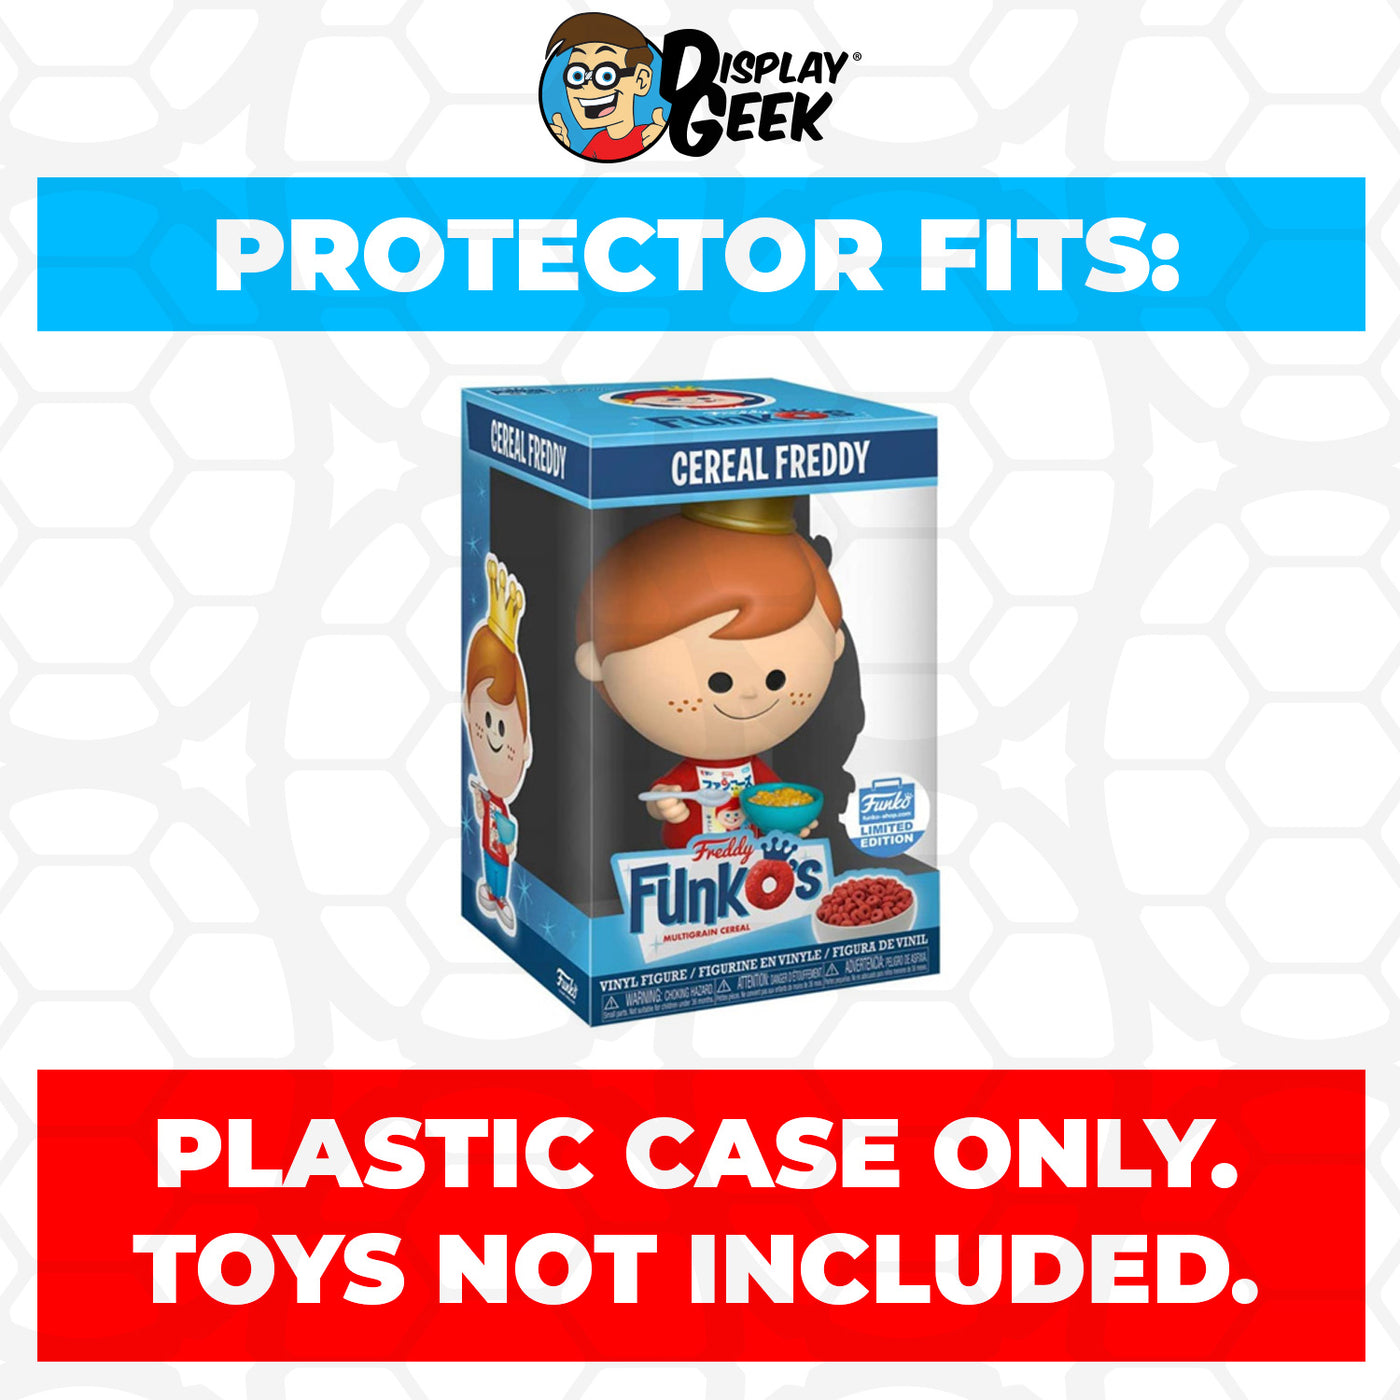 Pop Protector for Freddy Funko Cereal Freddy on The Protector Guide App by Display Geek